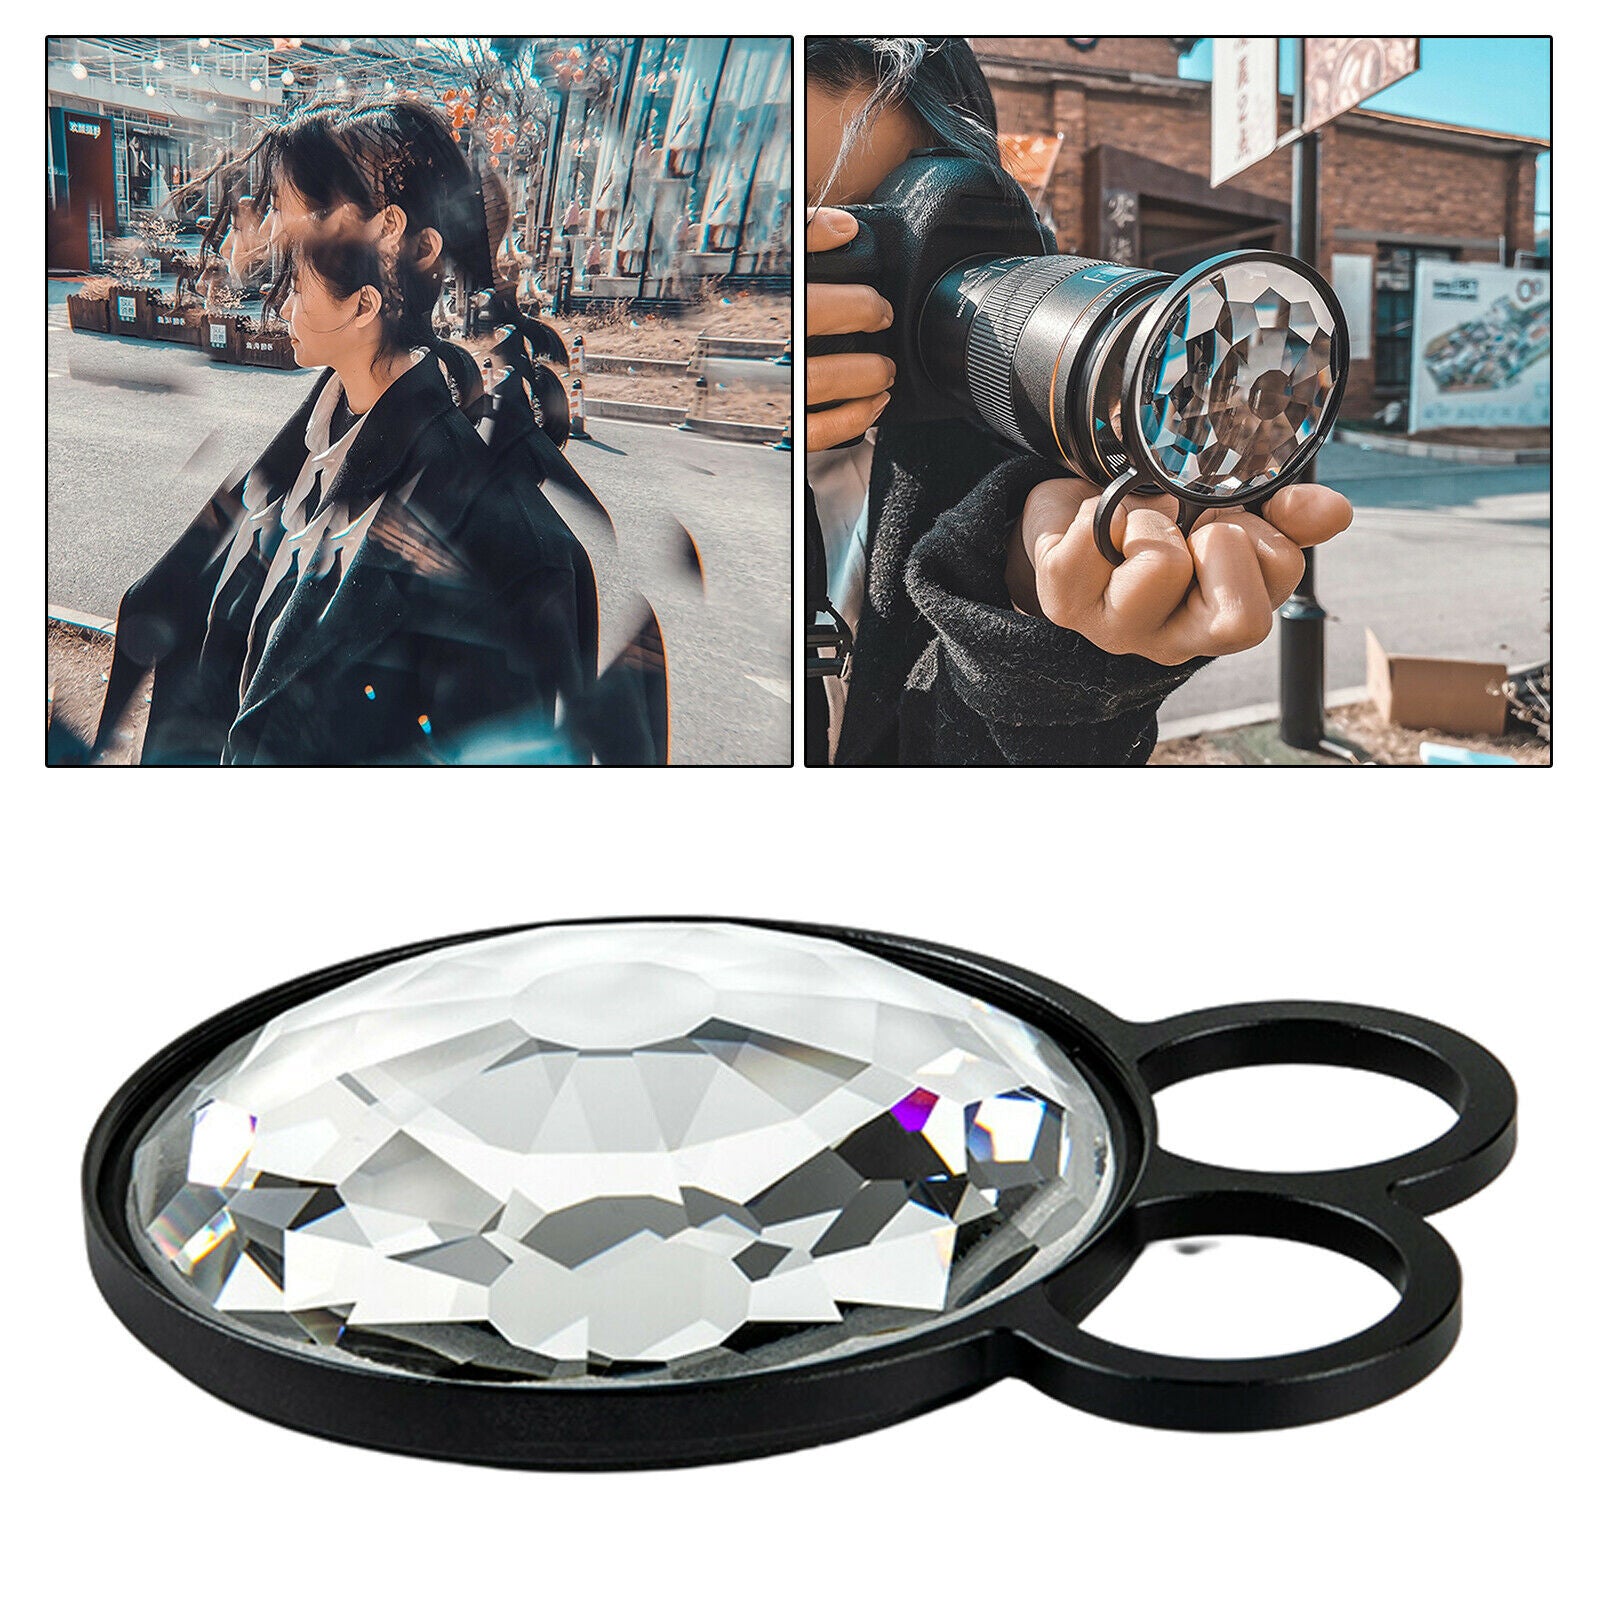 Kaleidoscope Glass Prism 77mm Rotatable Variable Subjects for Photo Shooting